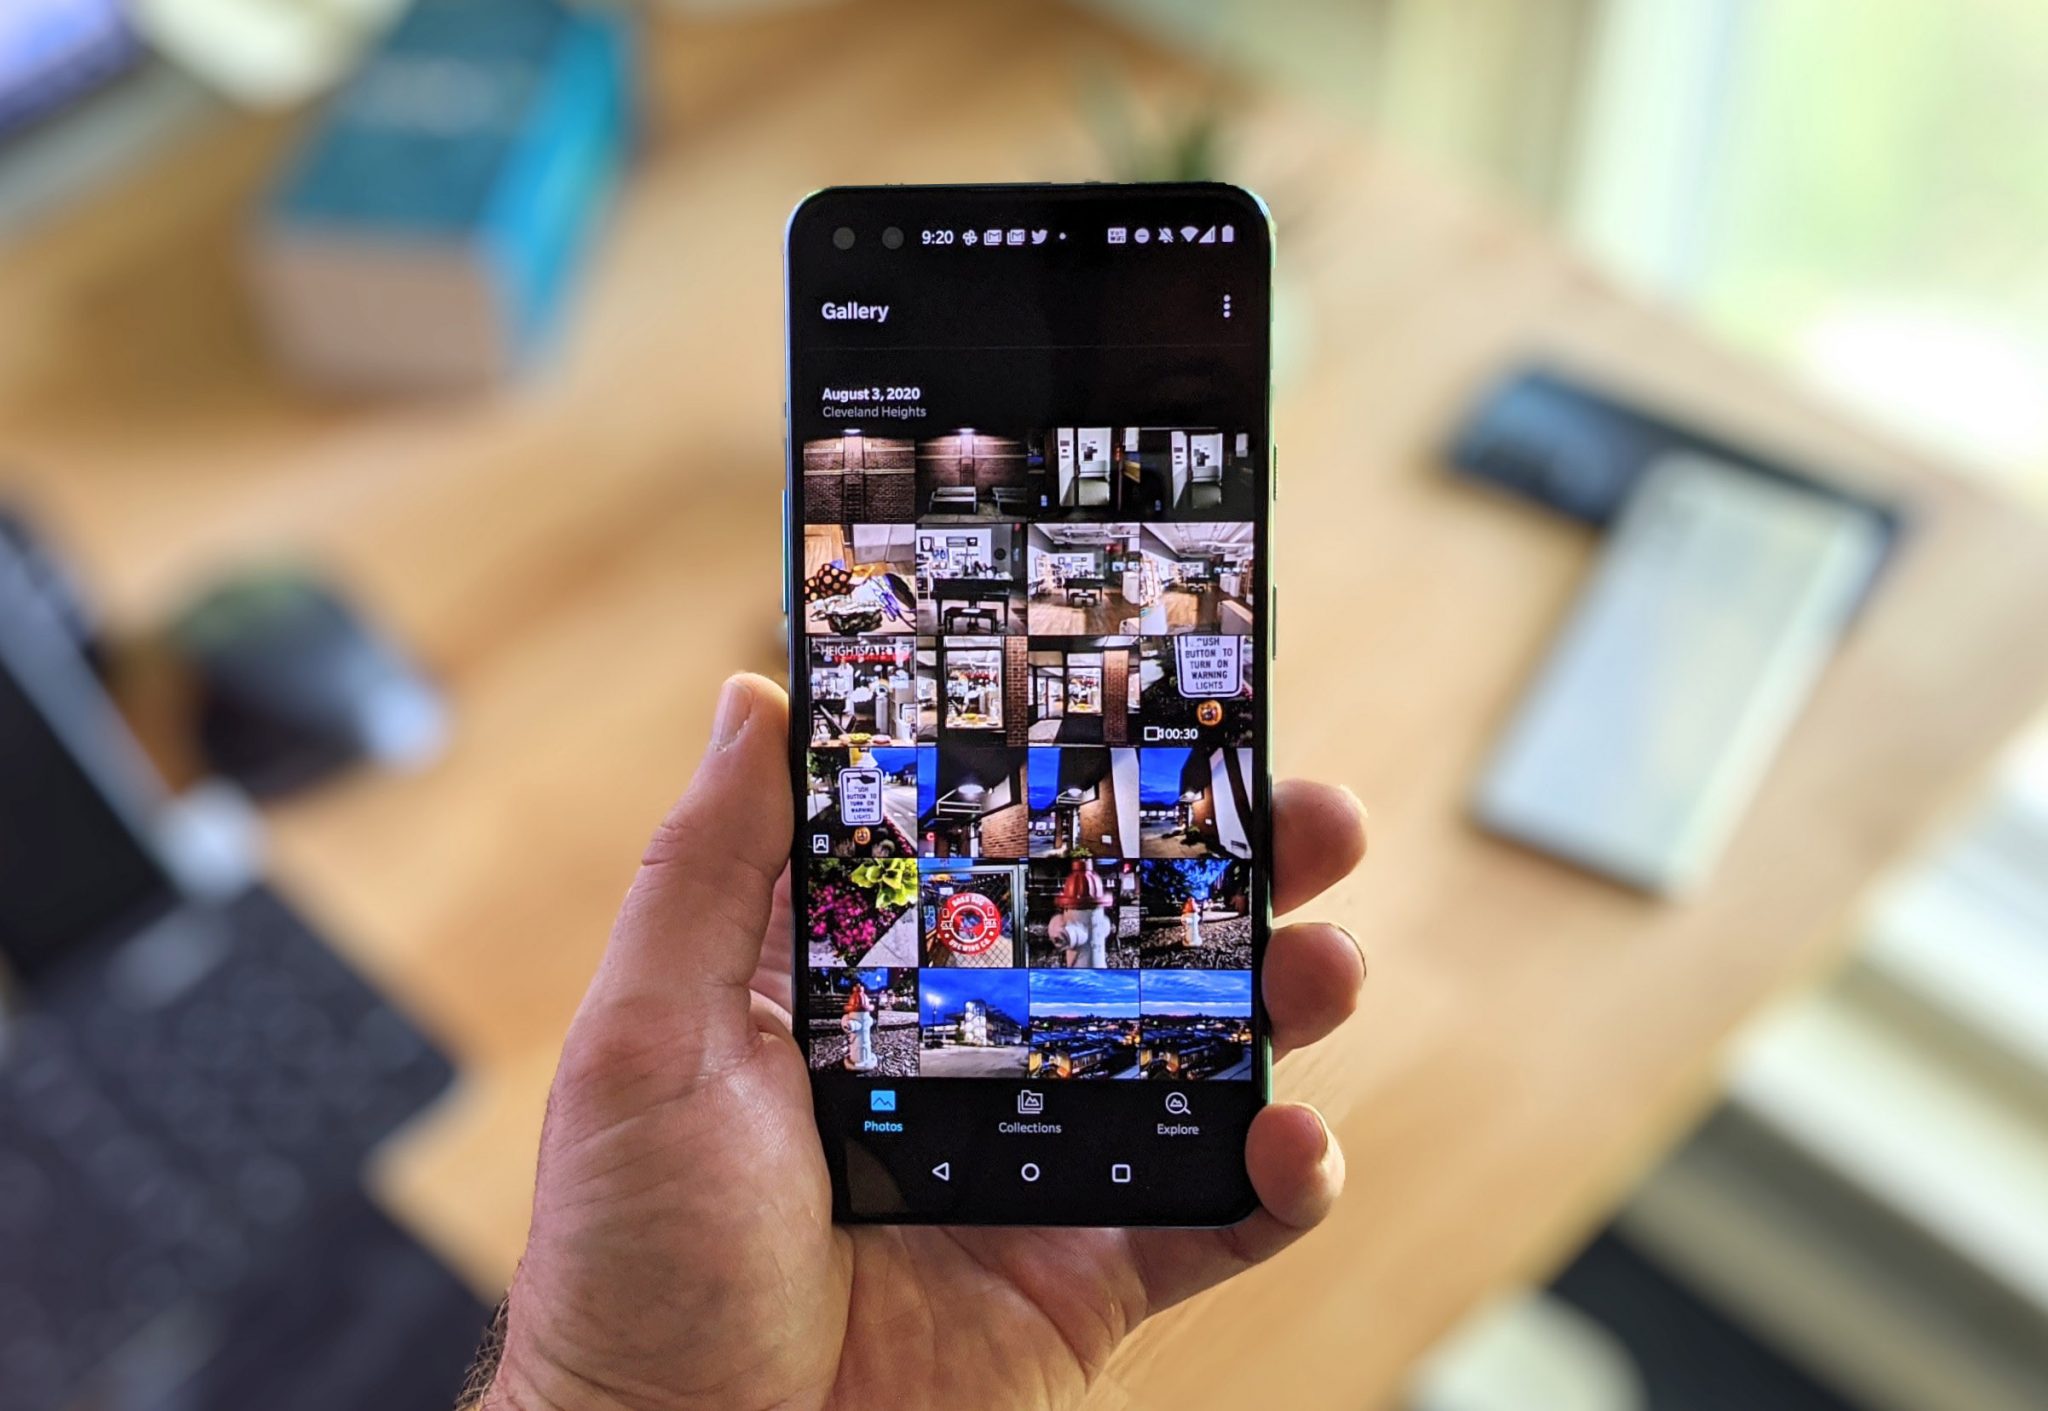 How to recover deleted photos on your Android phone